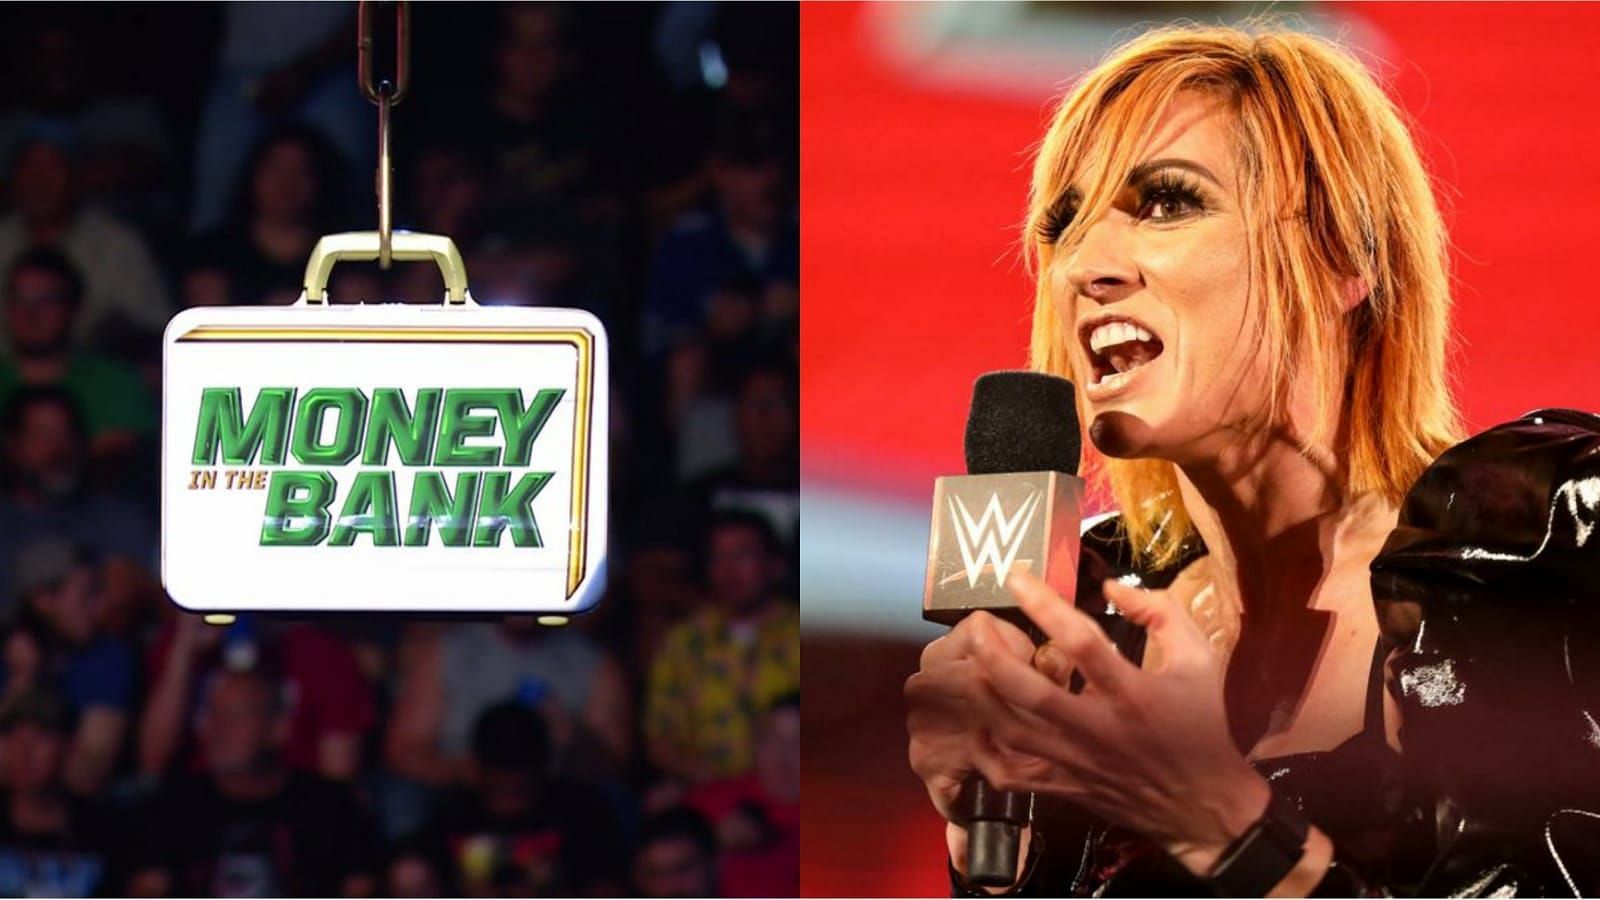 Can Becky Lynch clinch the Money in the Bank briefcase on Saturday?